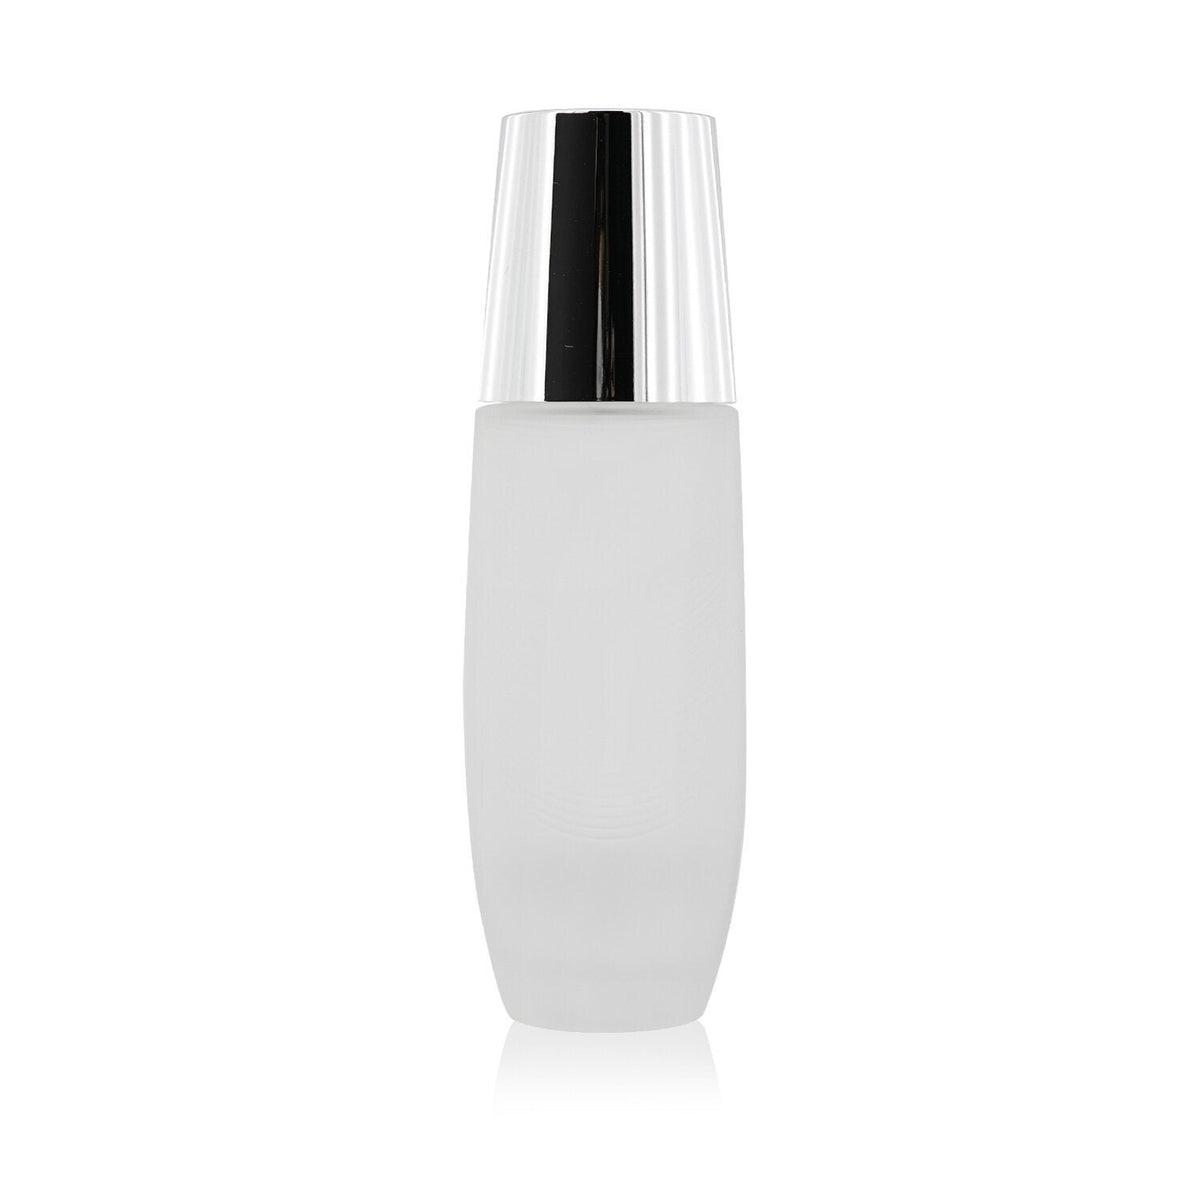 Sensai Cellular Performance Lotion I - Light - Premium Moisturizers from Kanebo - Just $77! Shop now at Ida Louise Boutique